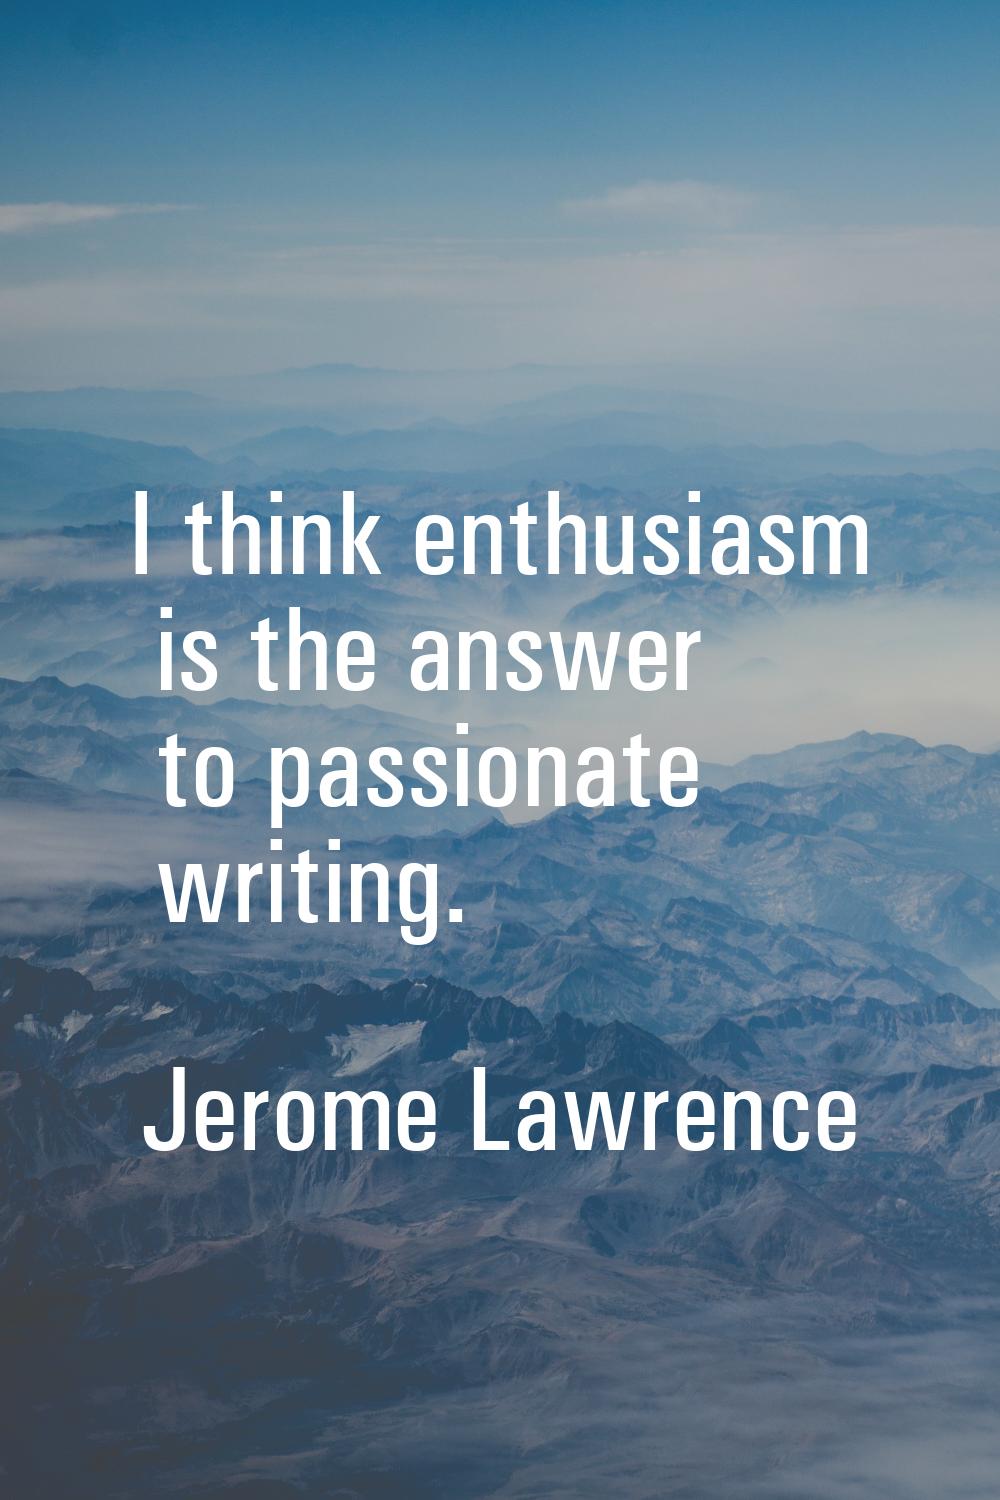 I think enthusiasm is the answer to passionate writing.